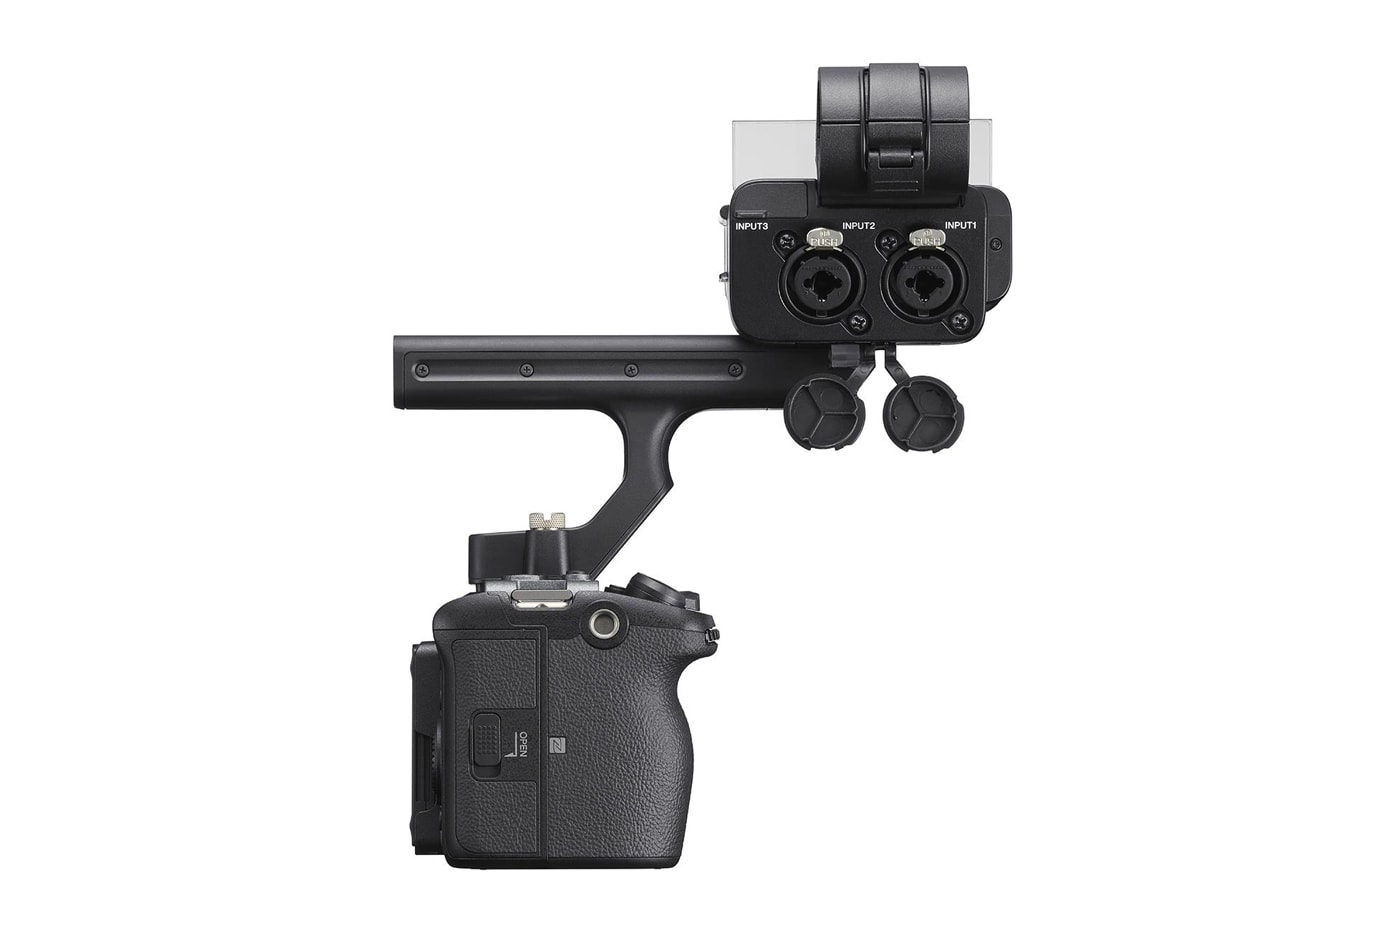 Son FX3 Cinema Line Camera Release A7SIII Videography Cinematography video creatives drone footage xlr slog luts editing premiere pro 